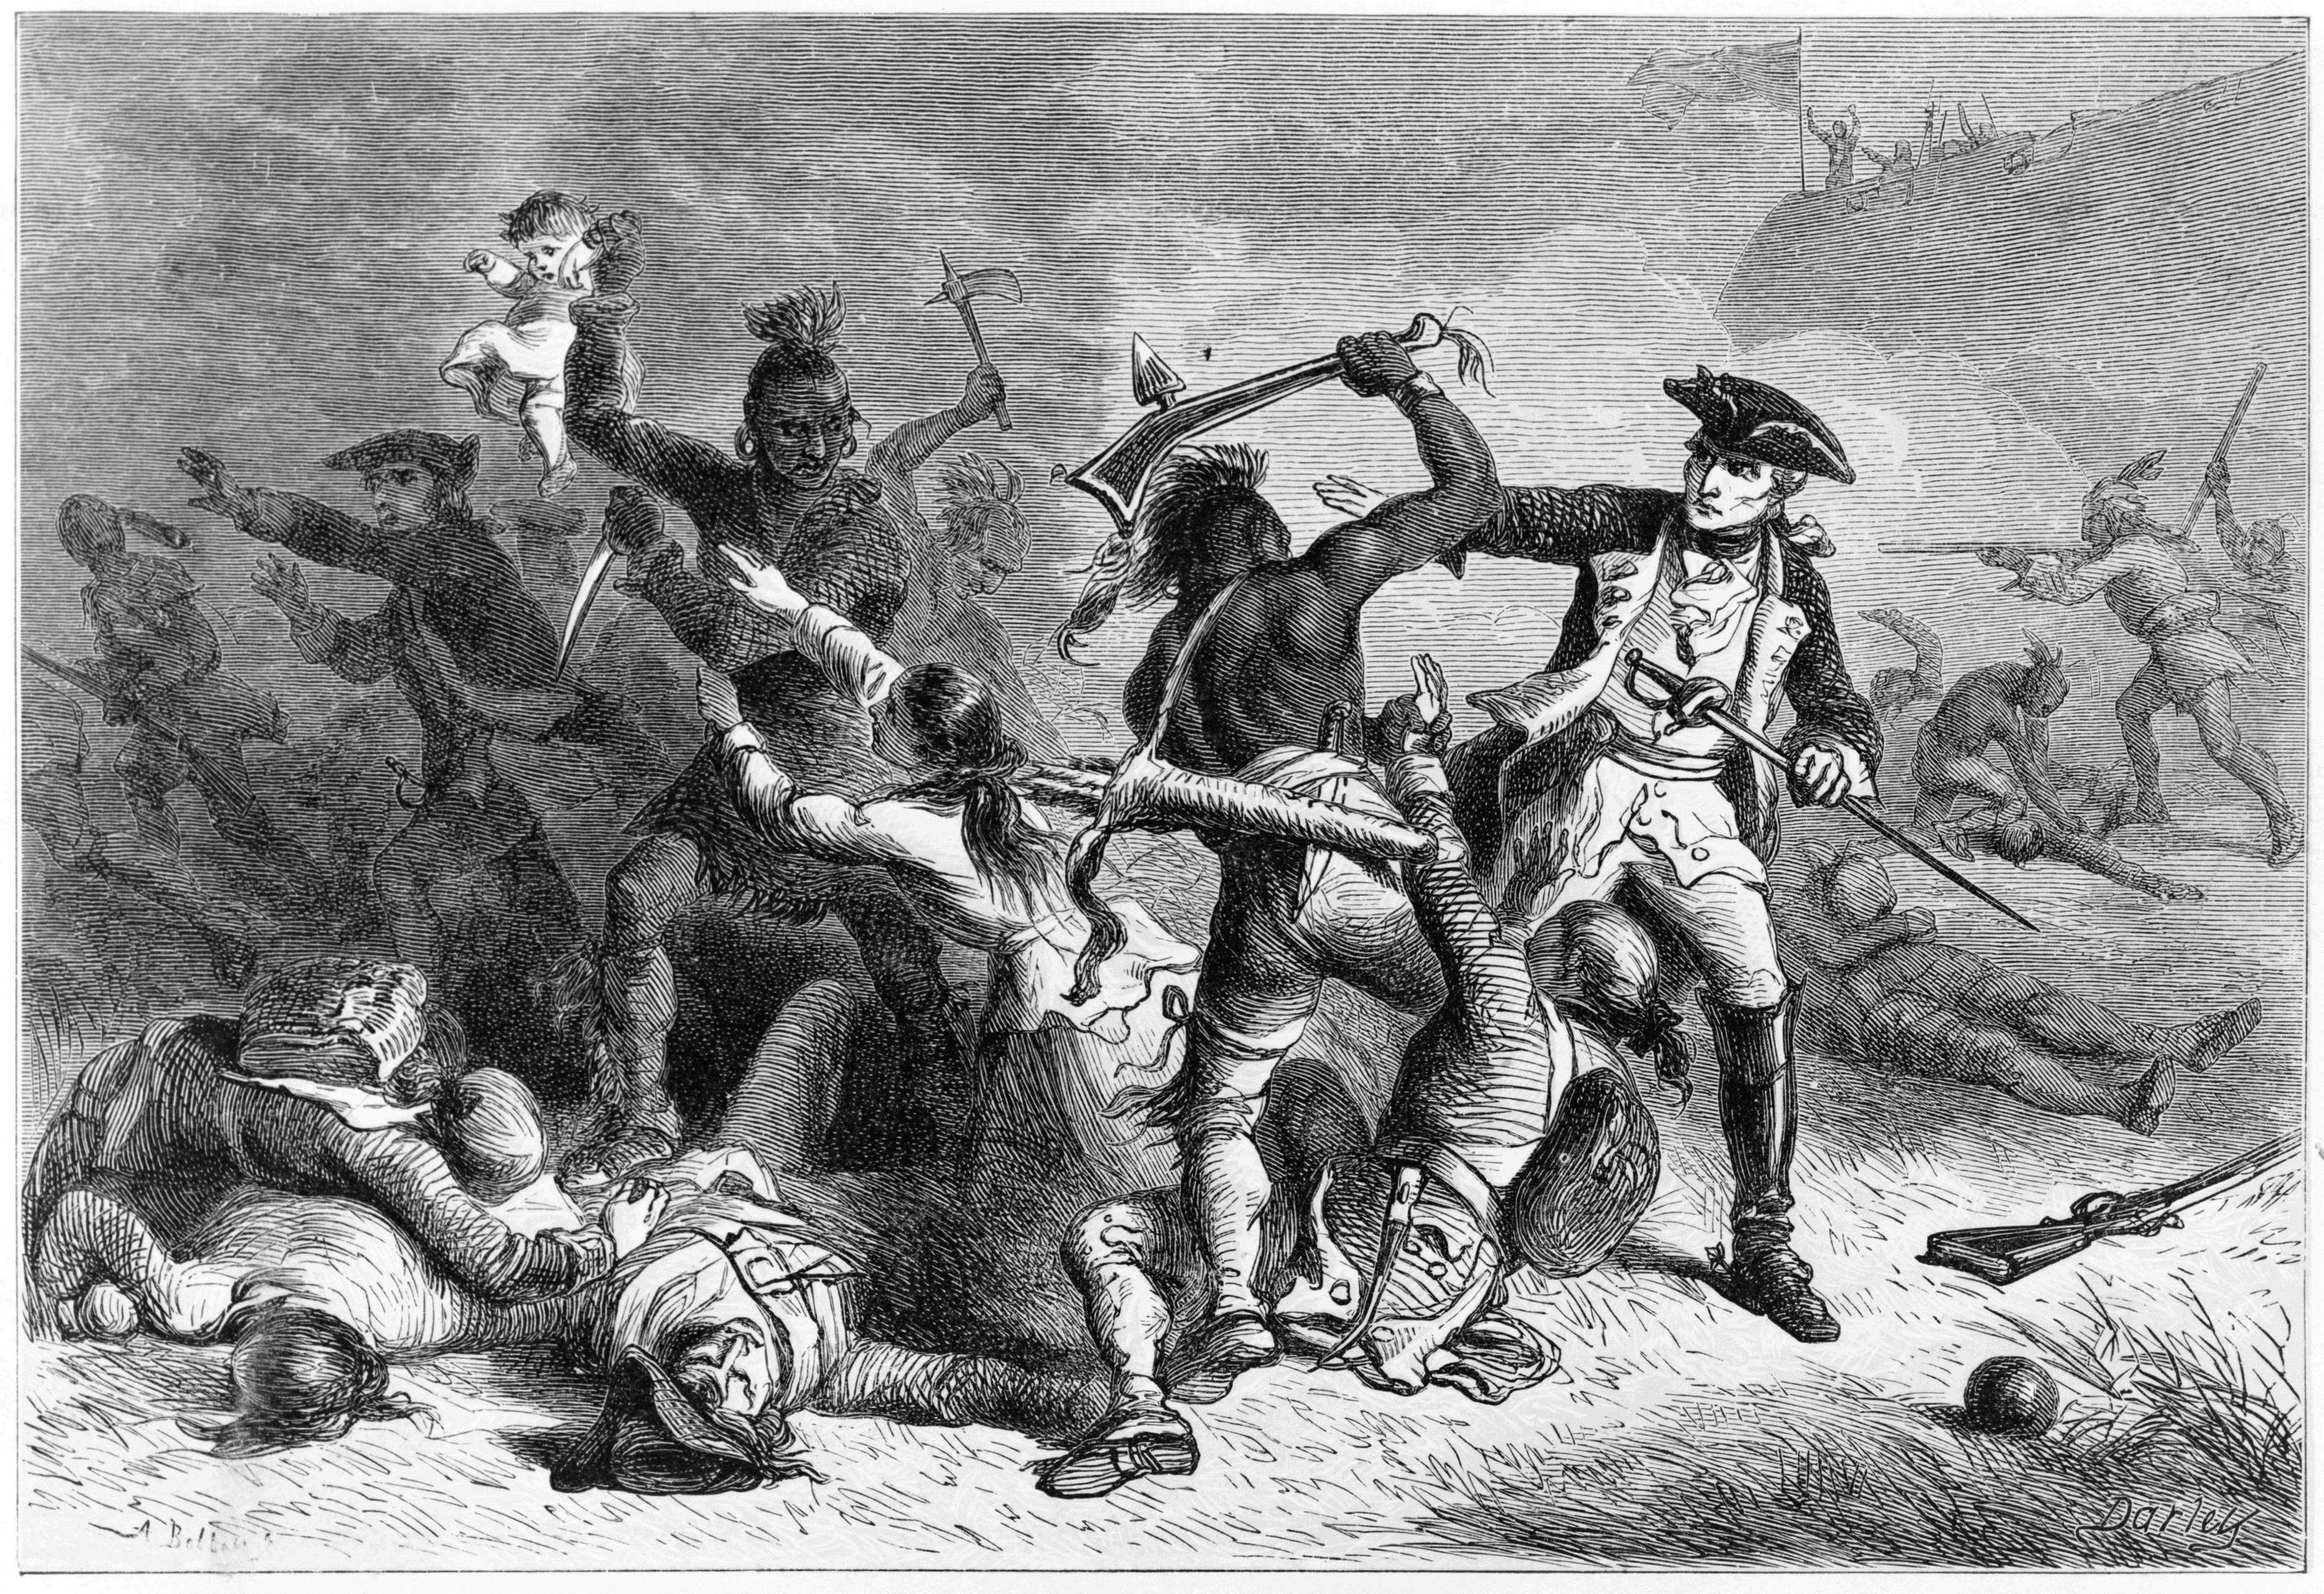 Indians attacking soldiers and citizens